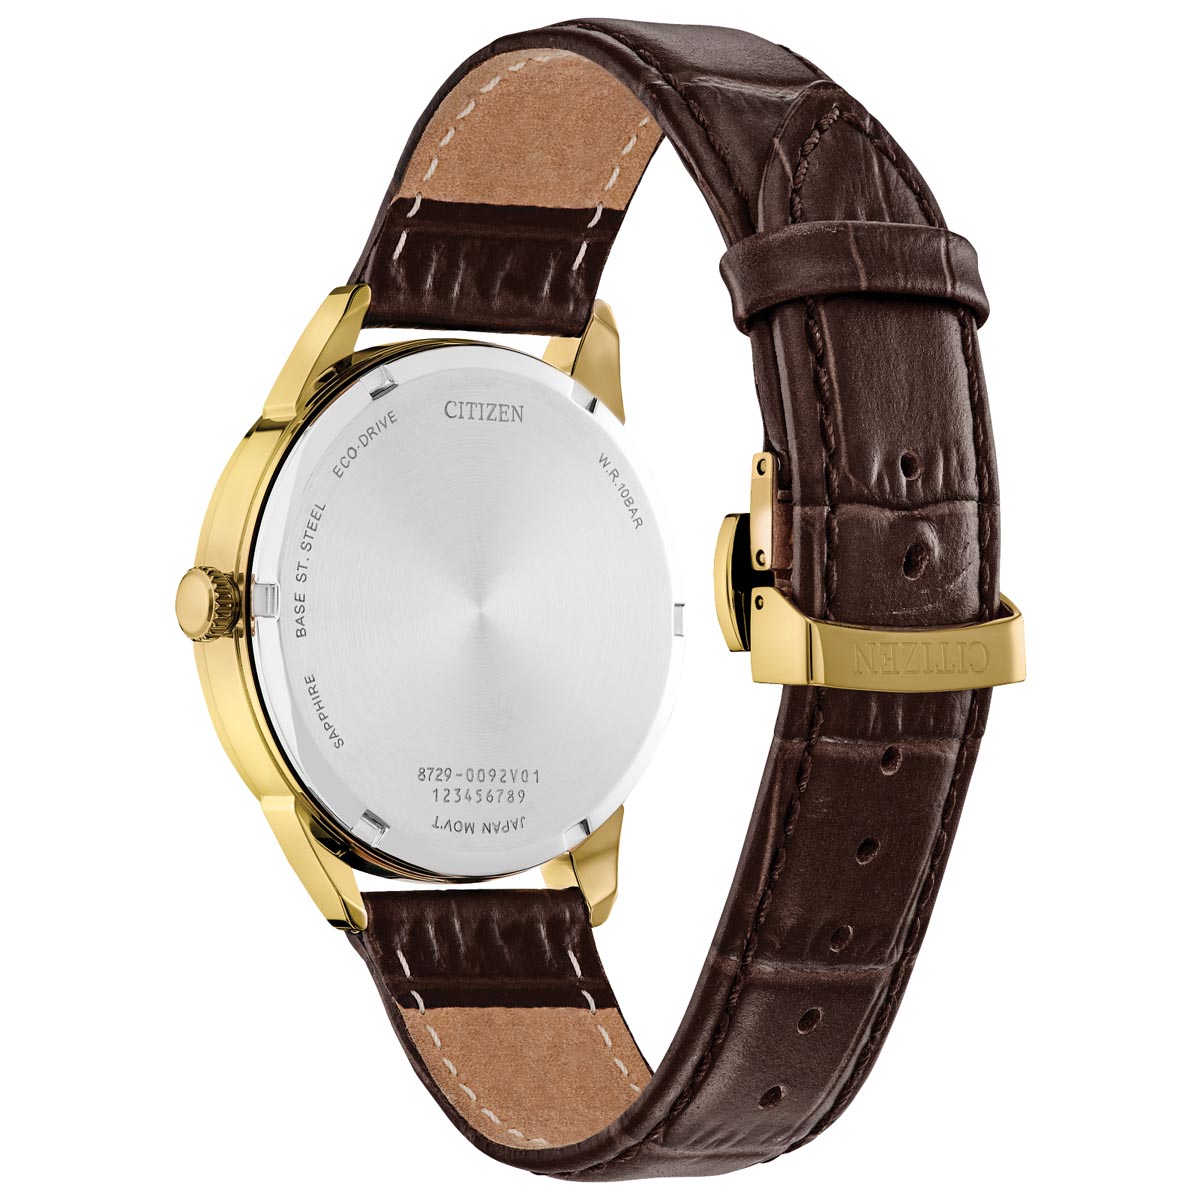 Citizen Classic Mens Watch with Black Dial and Brown Leather Strap (eco drive movement)